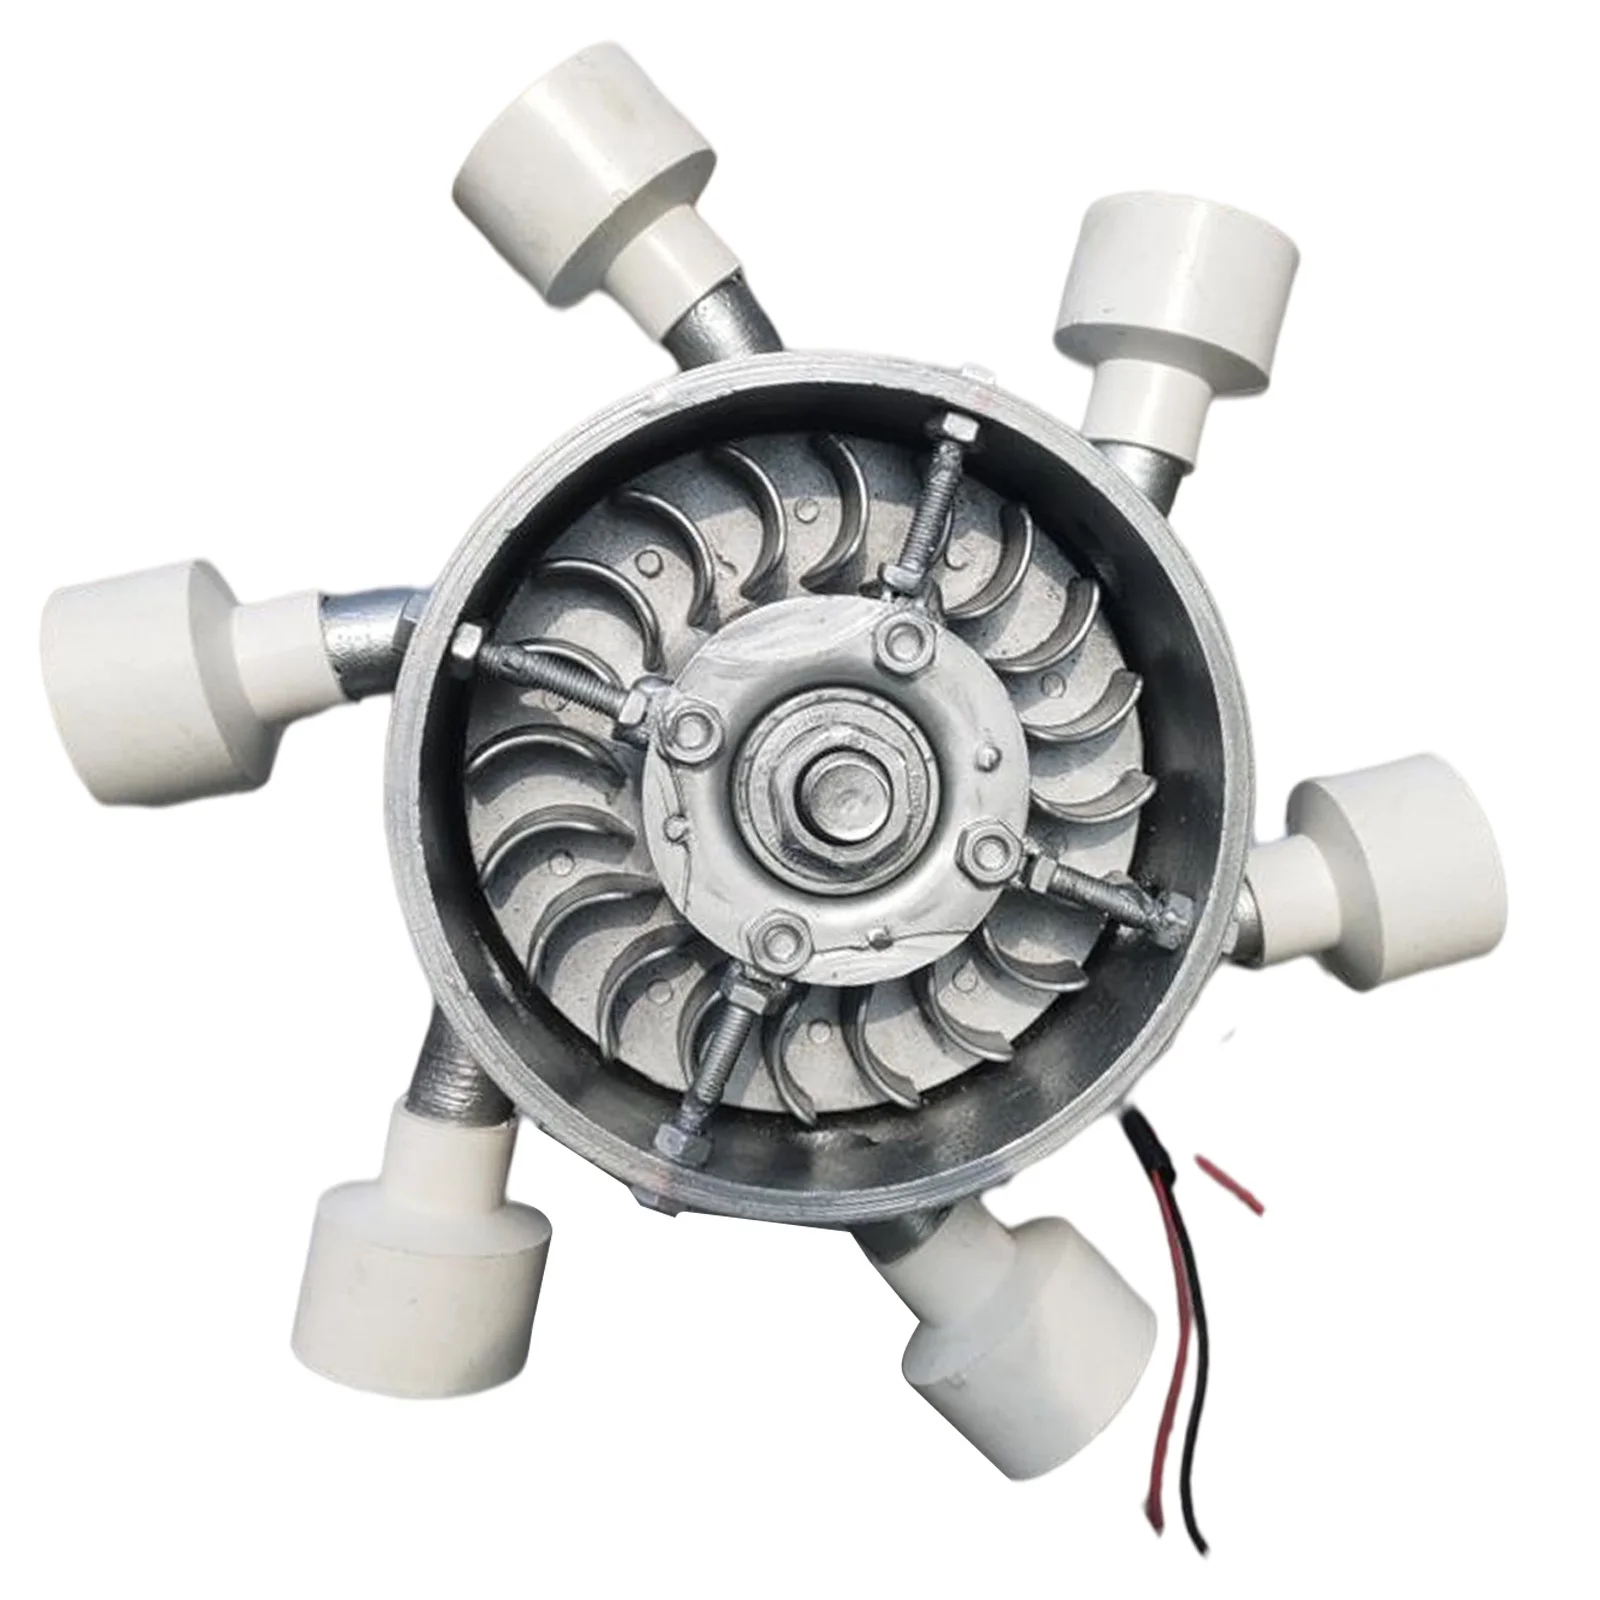 Stainless Steel 3KW Mini Turbine 220V Micro Hydropower Generator Hydroelectric Power Station New Silver 20-29 A 3500/RPM